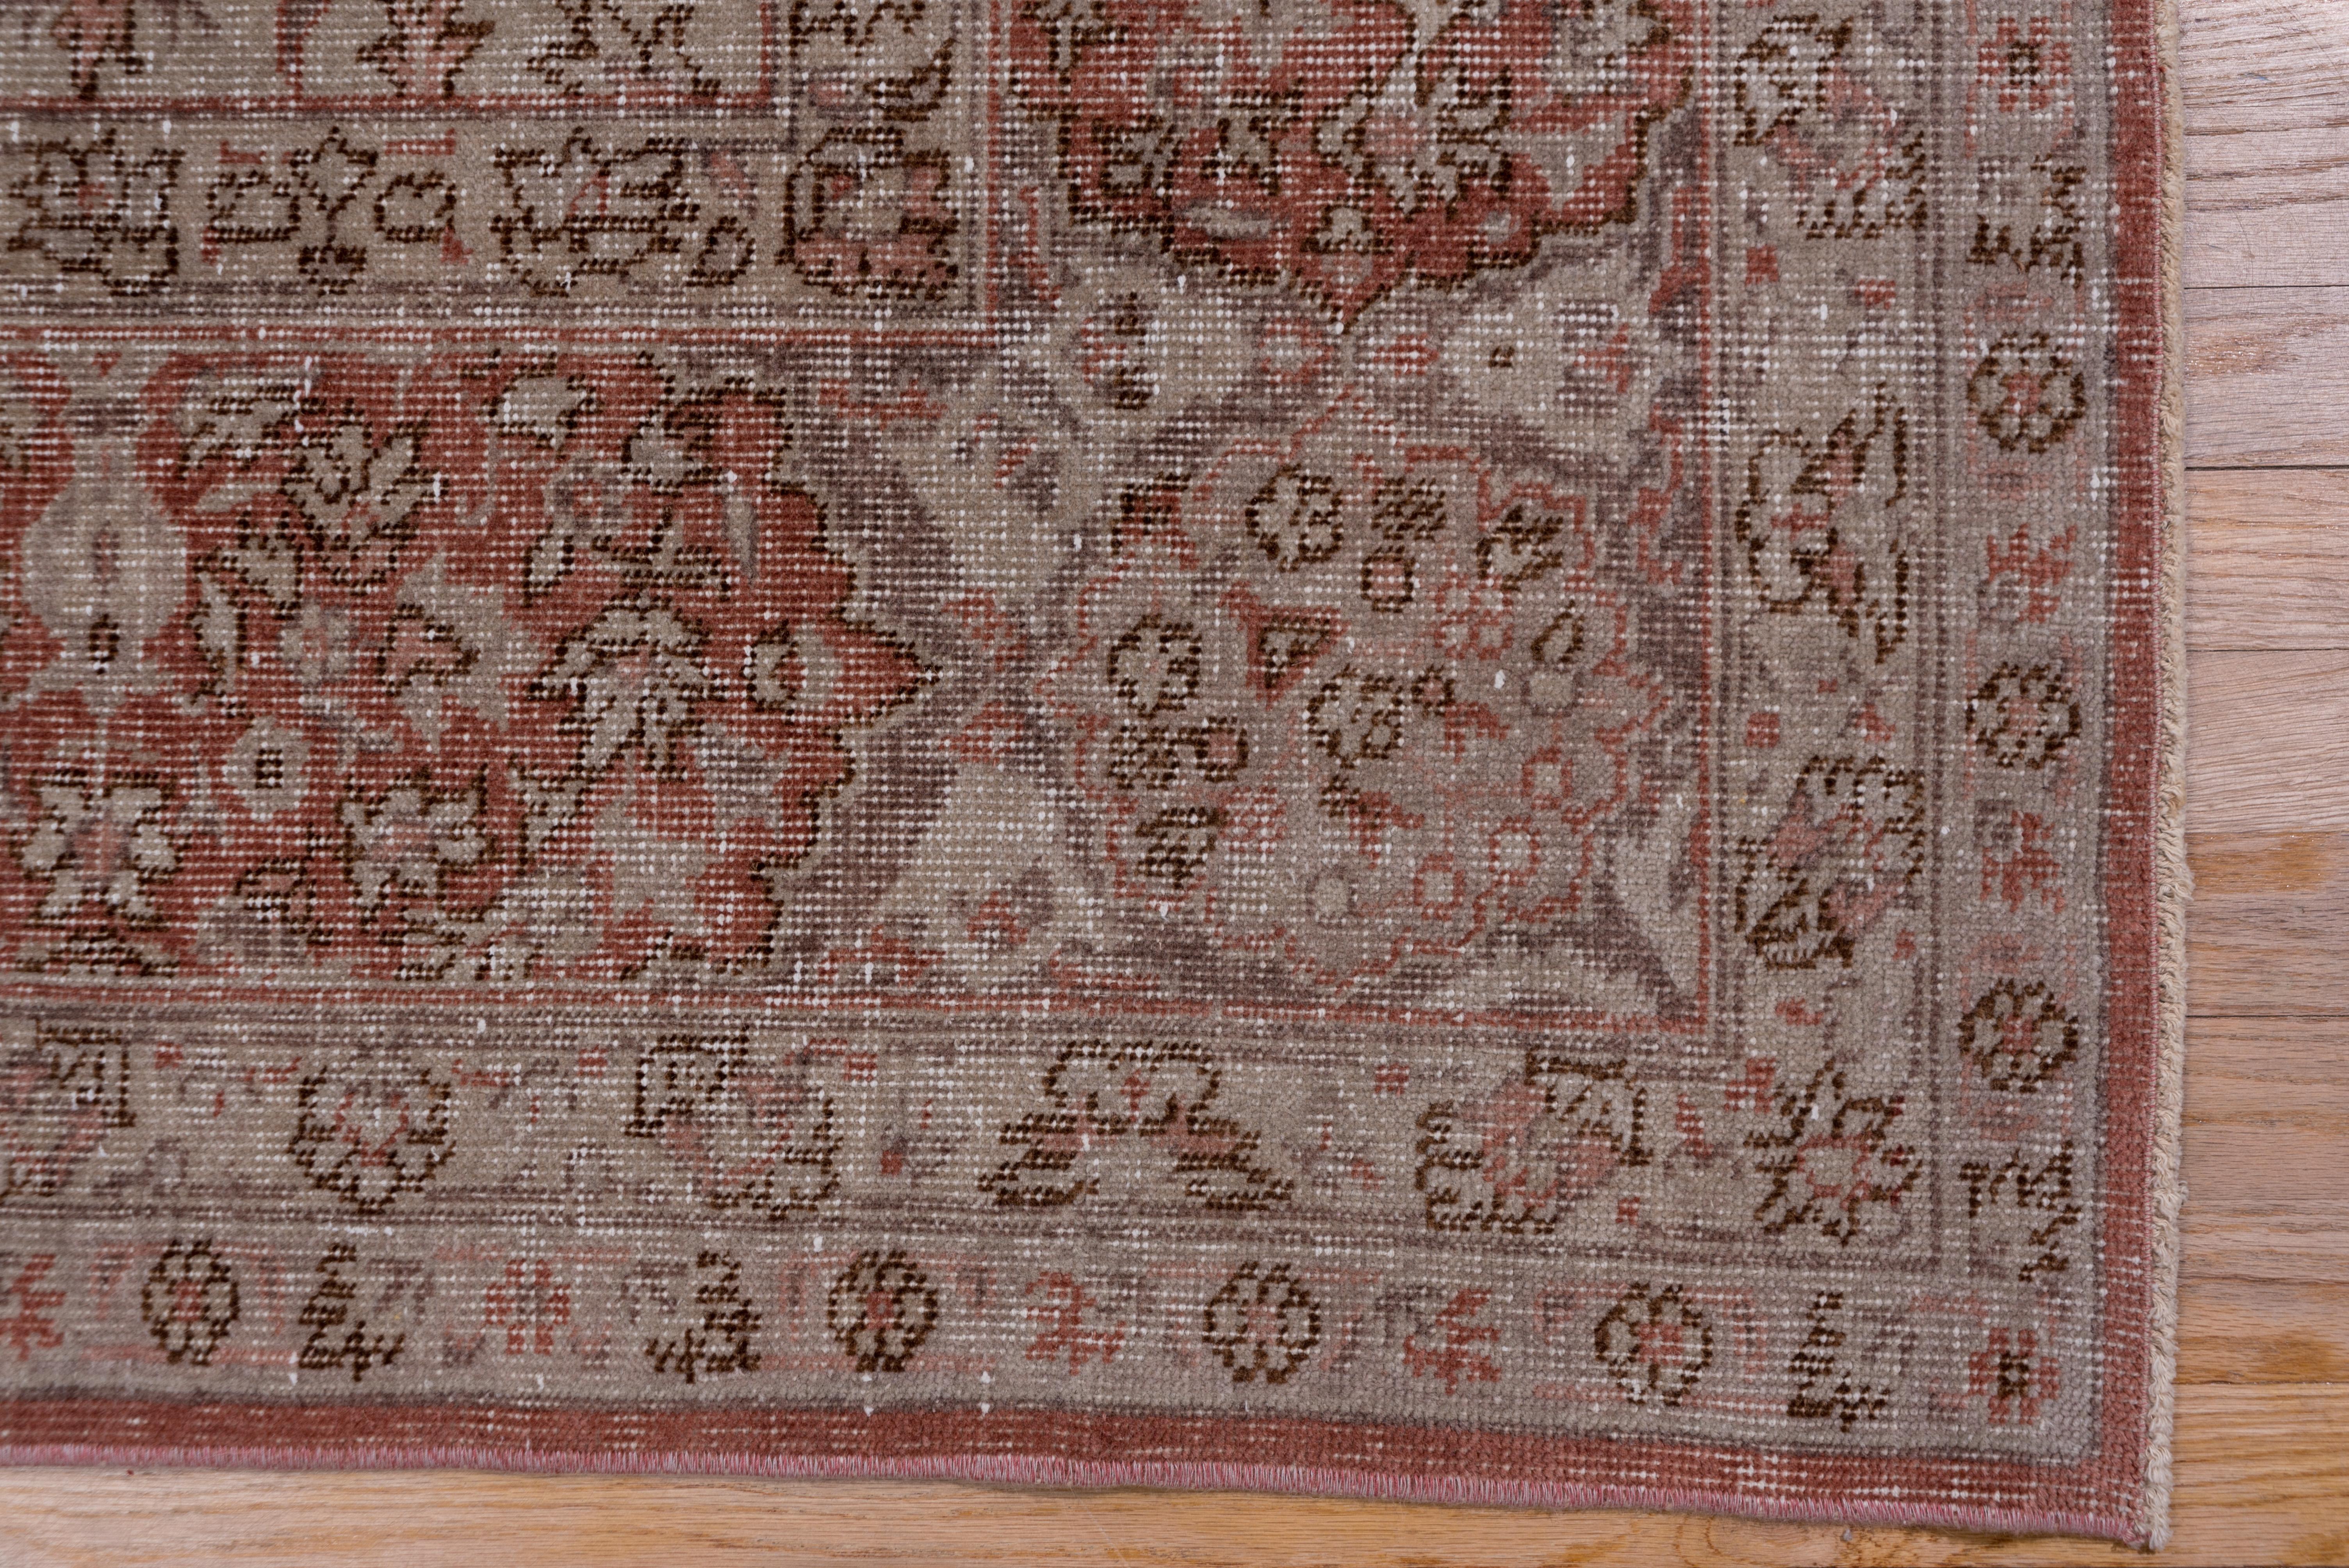 Wool Antique Turkish Oushak Rug, Red Borders, Taupe Allover Field, circa 1940s For Sale